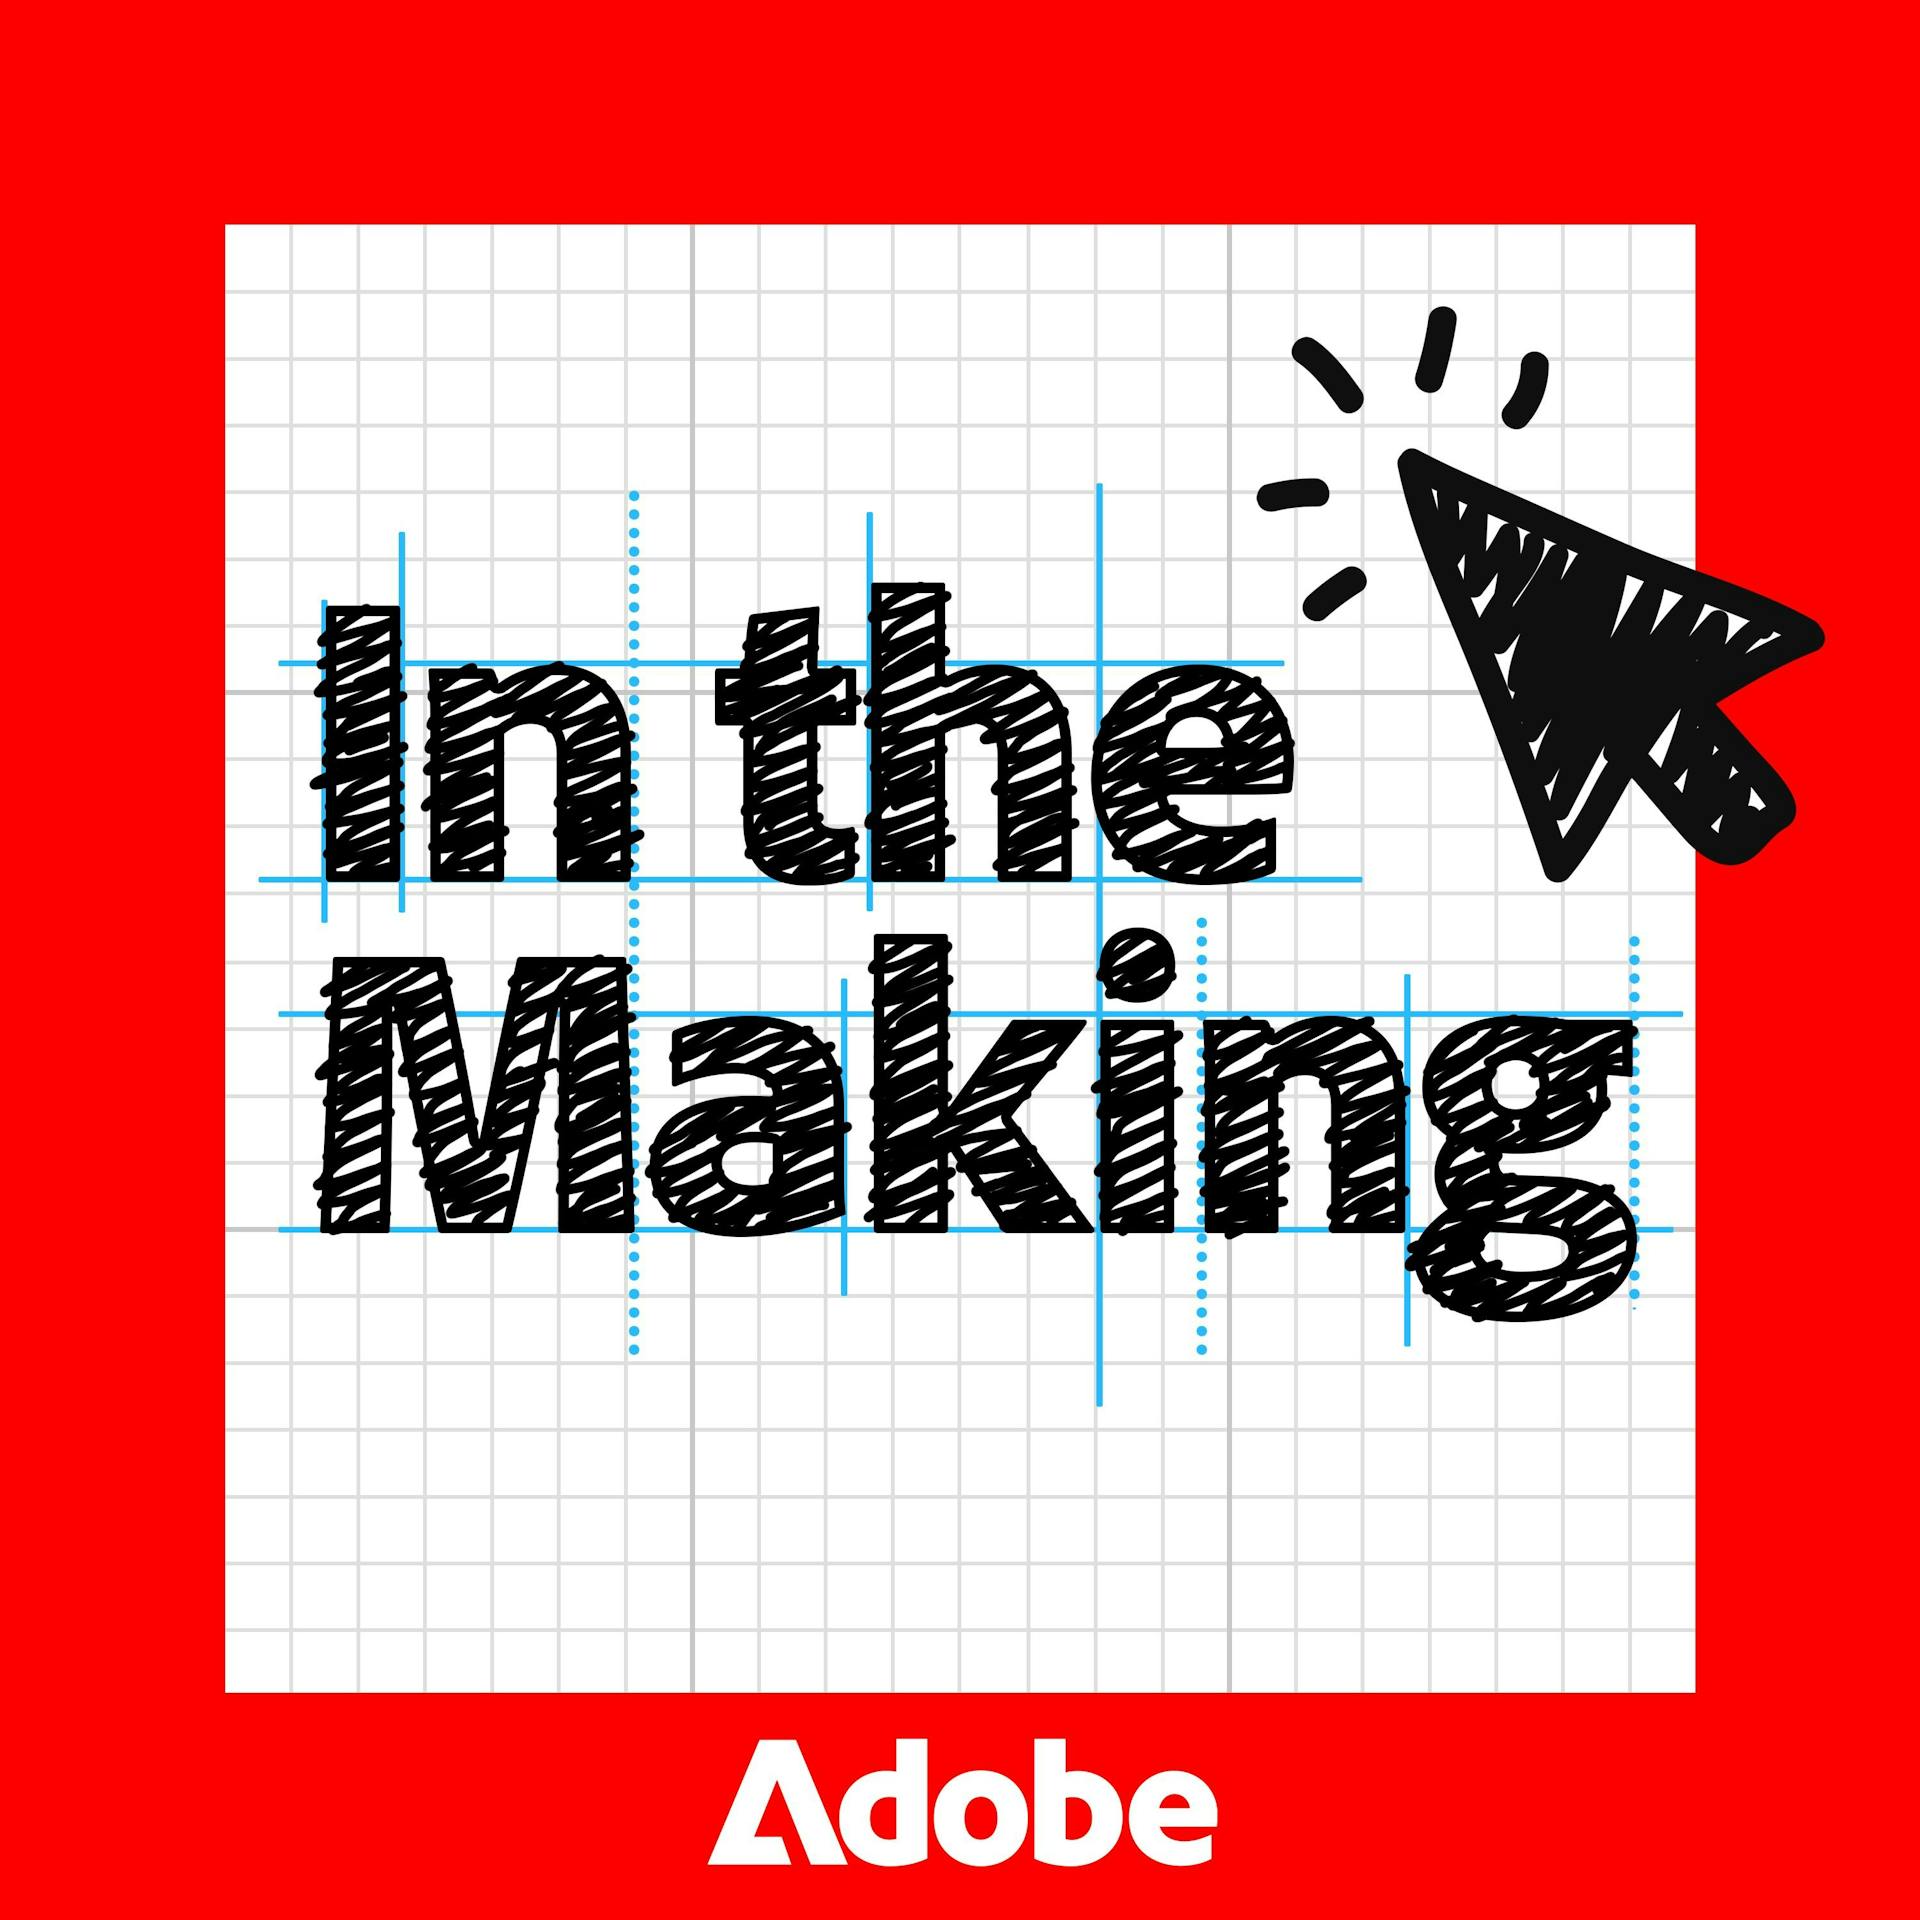 Review: In the Making from Adobe